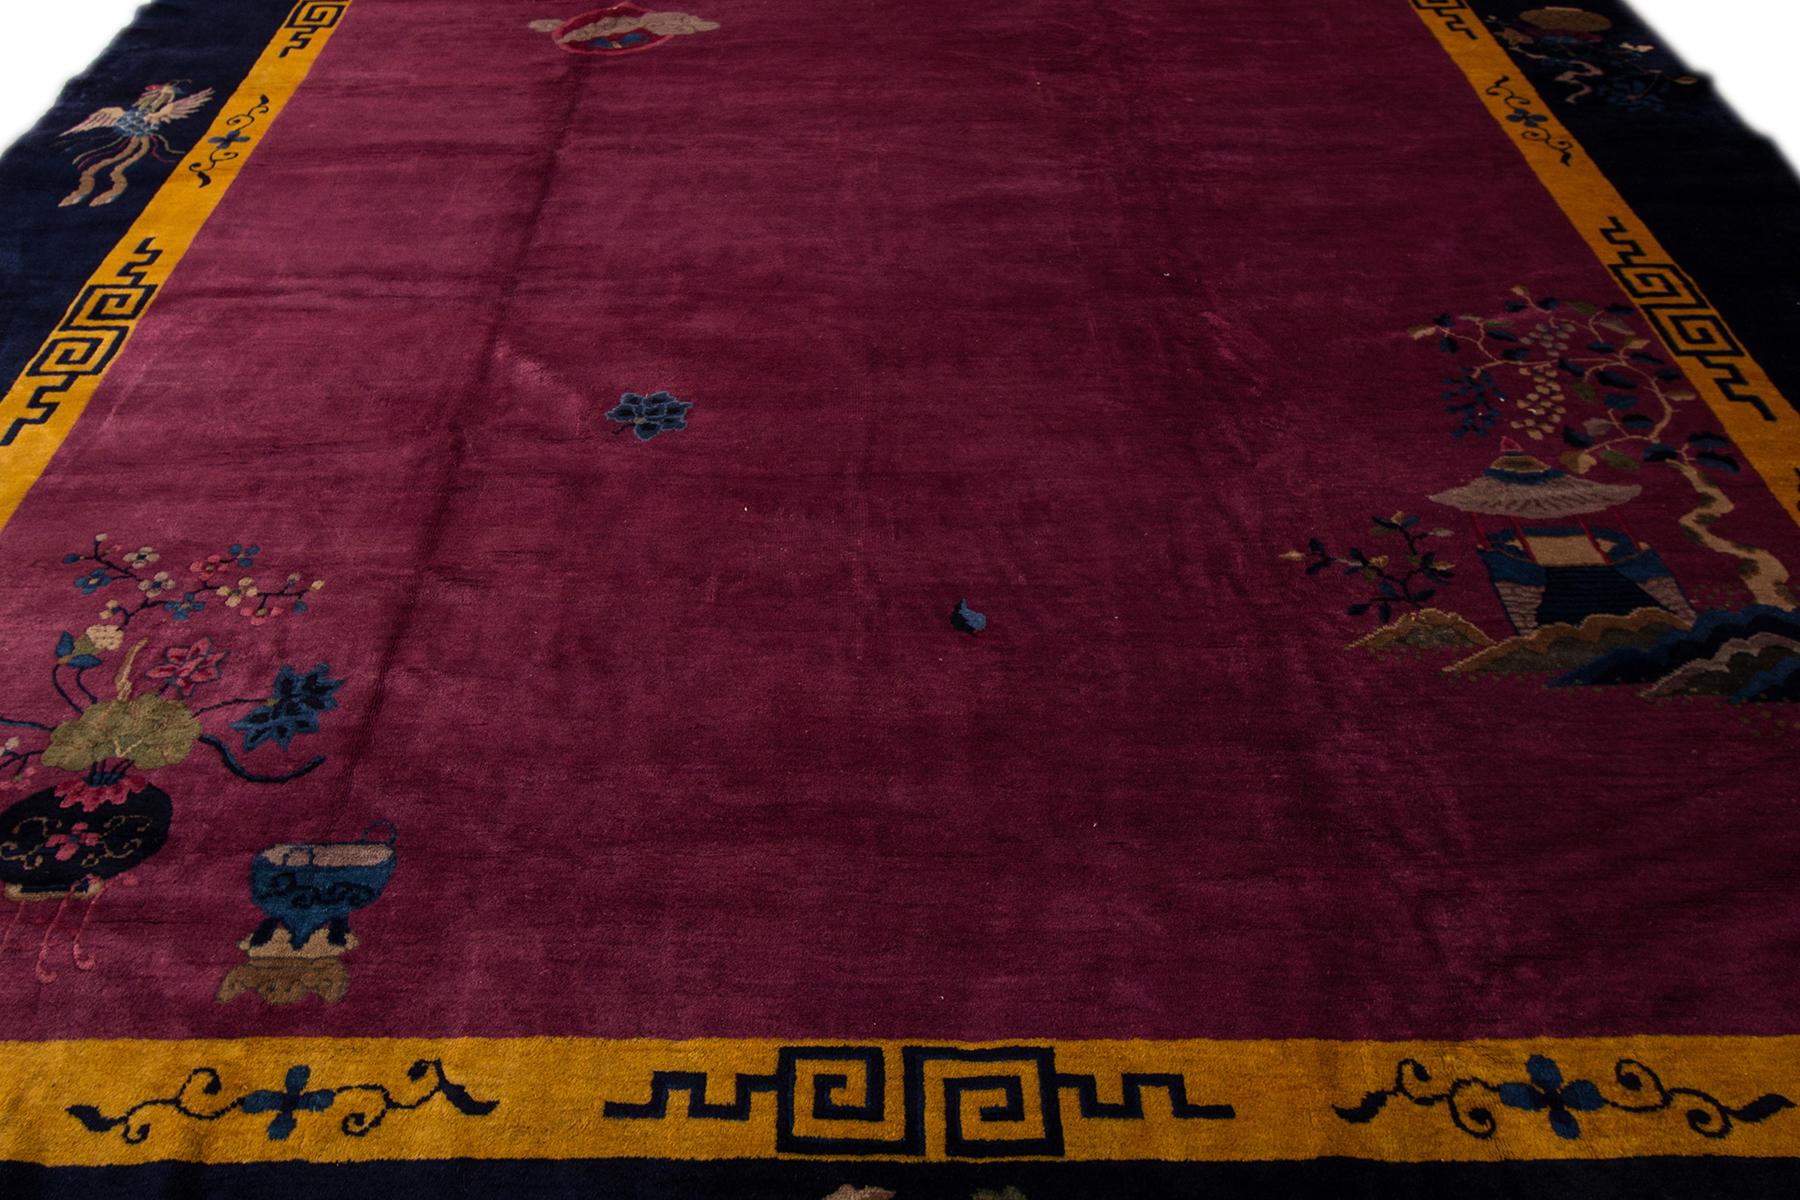 Hand-Knotted Antique Purple Chinese Deco Wool Rug 11 Ft 3 In X 15 Ft 4 In.